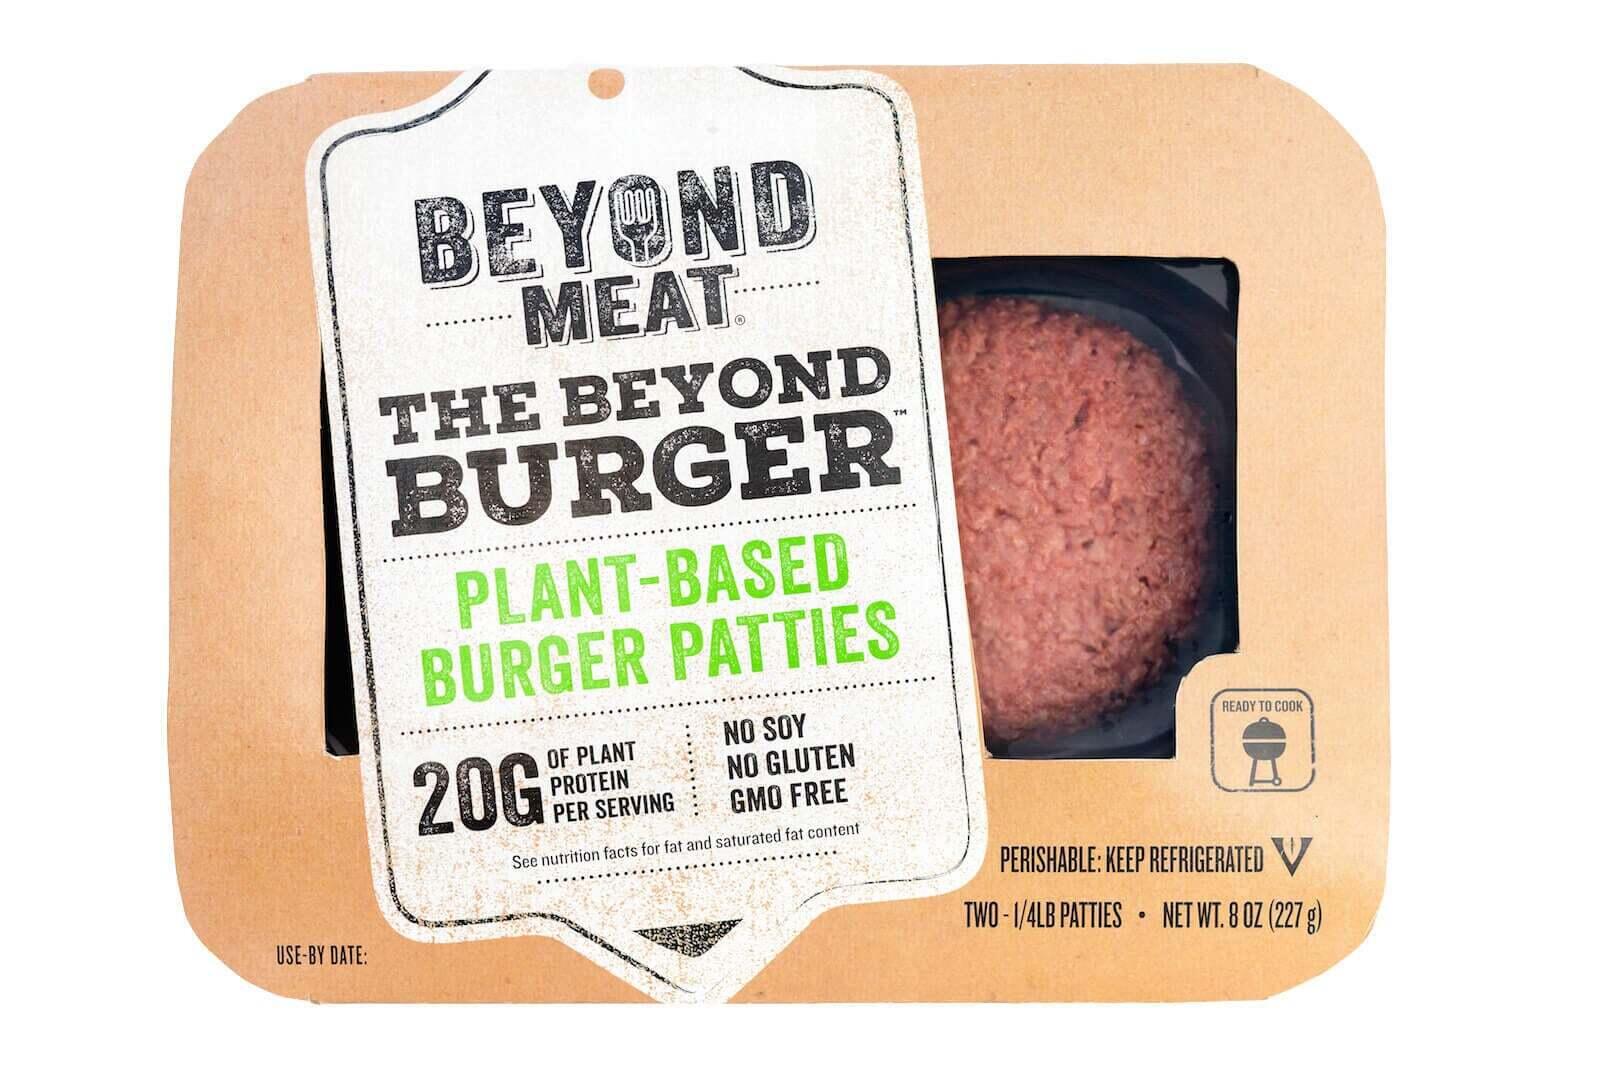 Food for Thought: How the ‘Beyond Burger’ is Changing the Fast-Casual Restaurant Industry